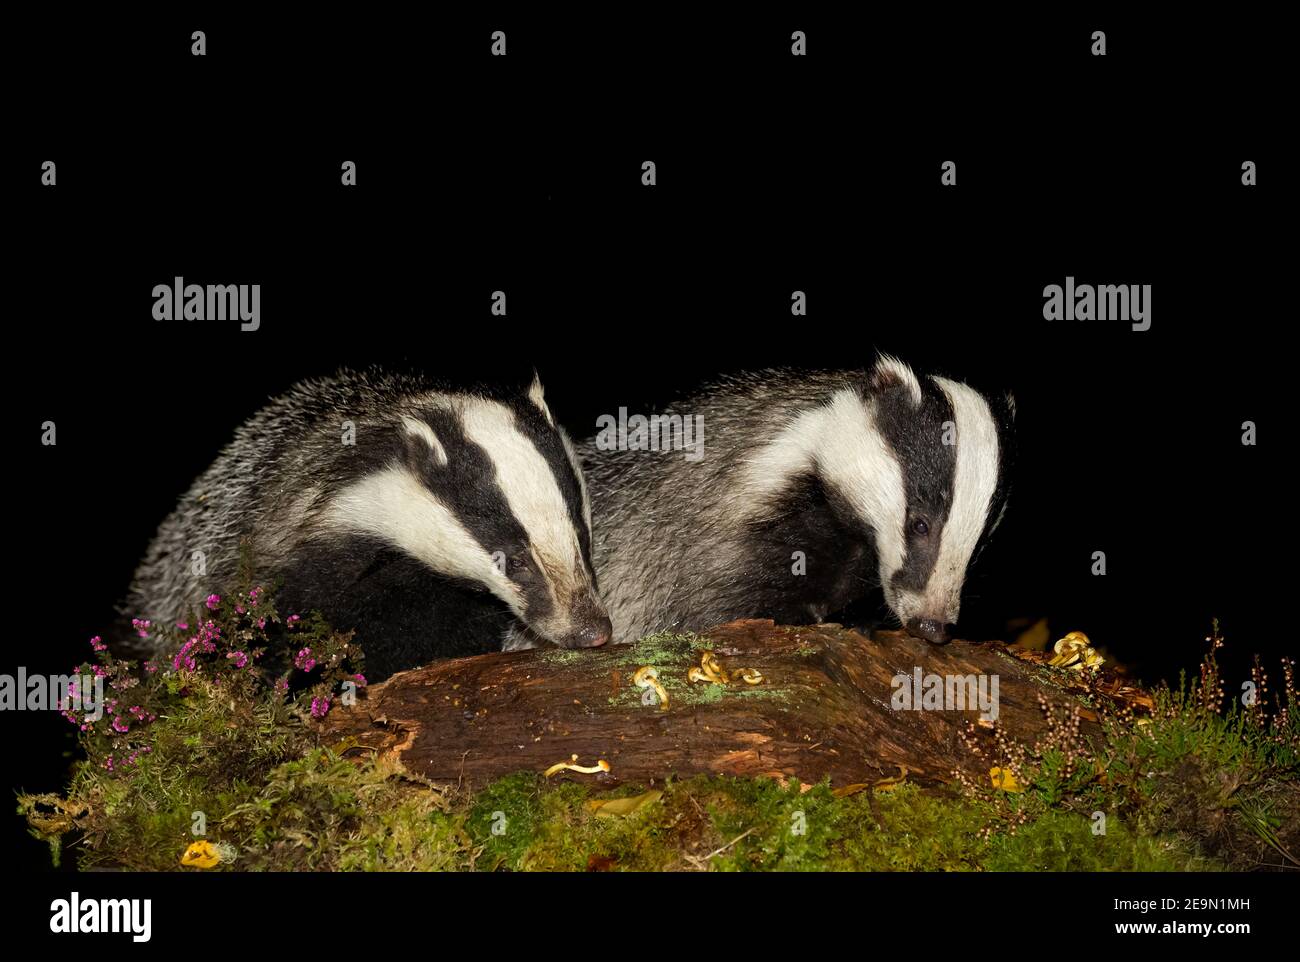 Badgers, Scientific name, Meles Meles. Two wild, native Eurasian badgers foraging at night on a log in Autumn, with green moss, toadstools and purple Stock Photo